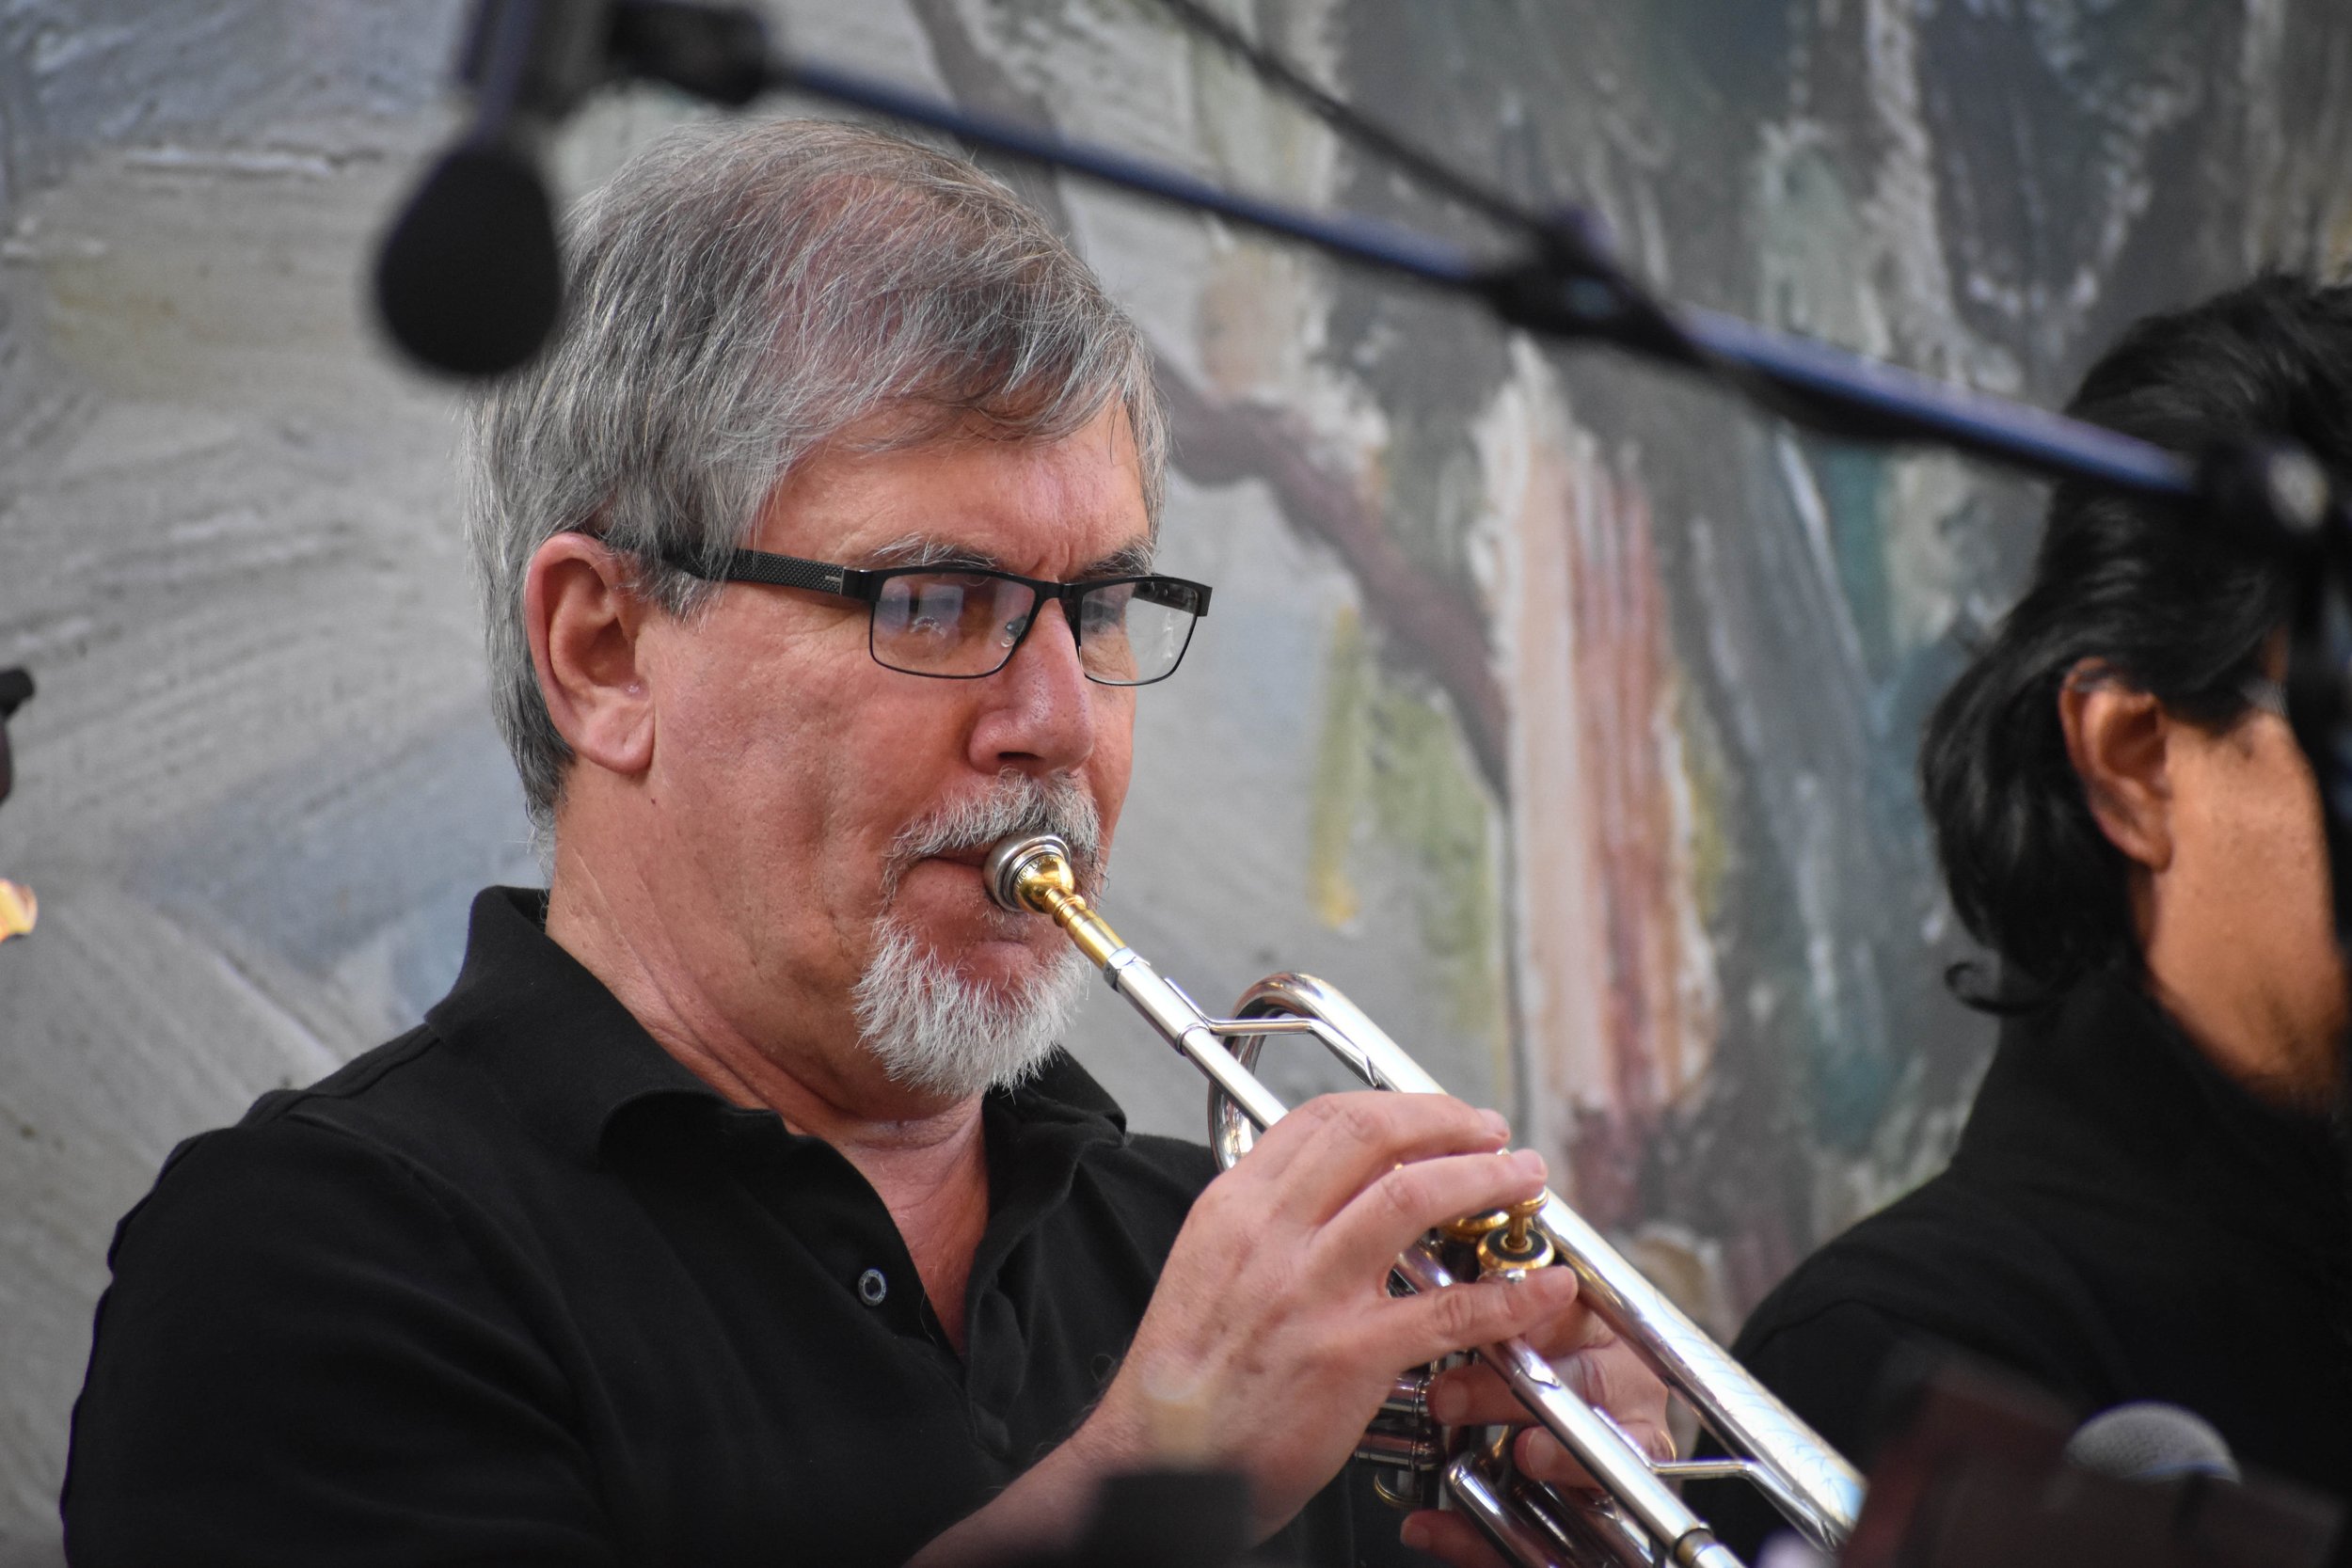 07-10-2023 Laguna Jazz Band concert at Pageant of the Masters by Peyton Webster43-42.jpg